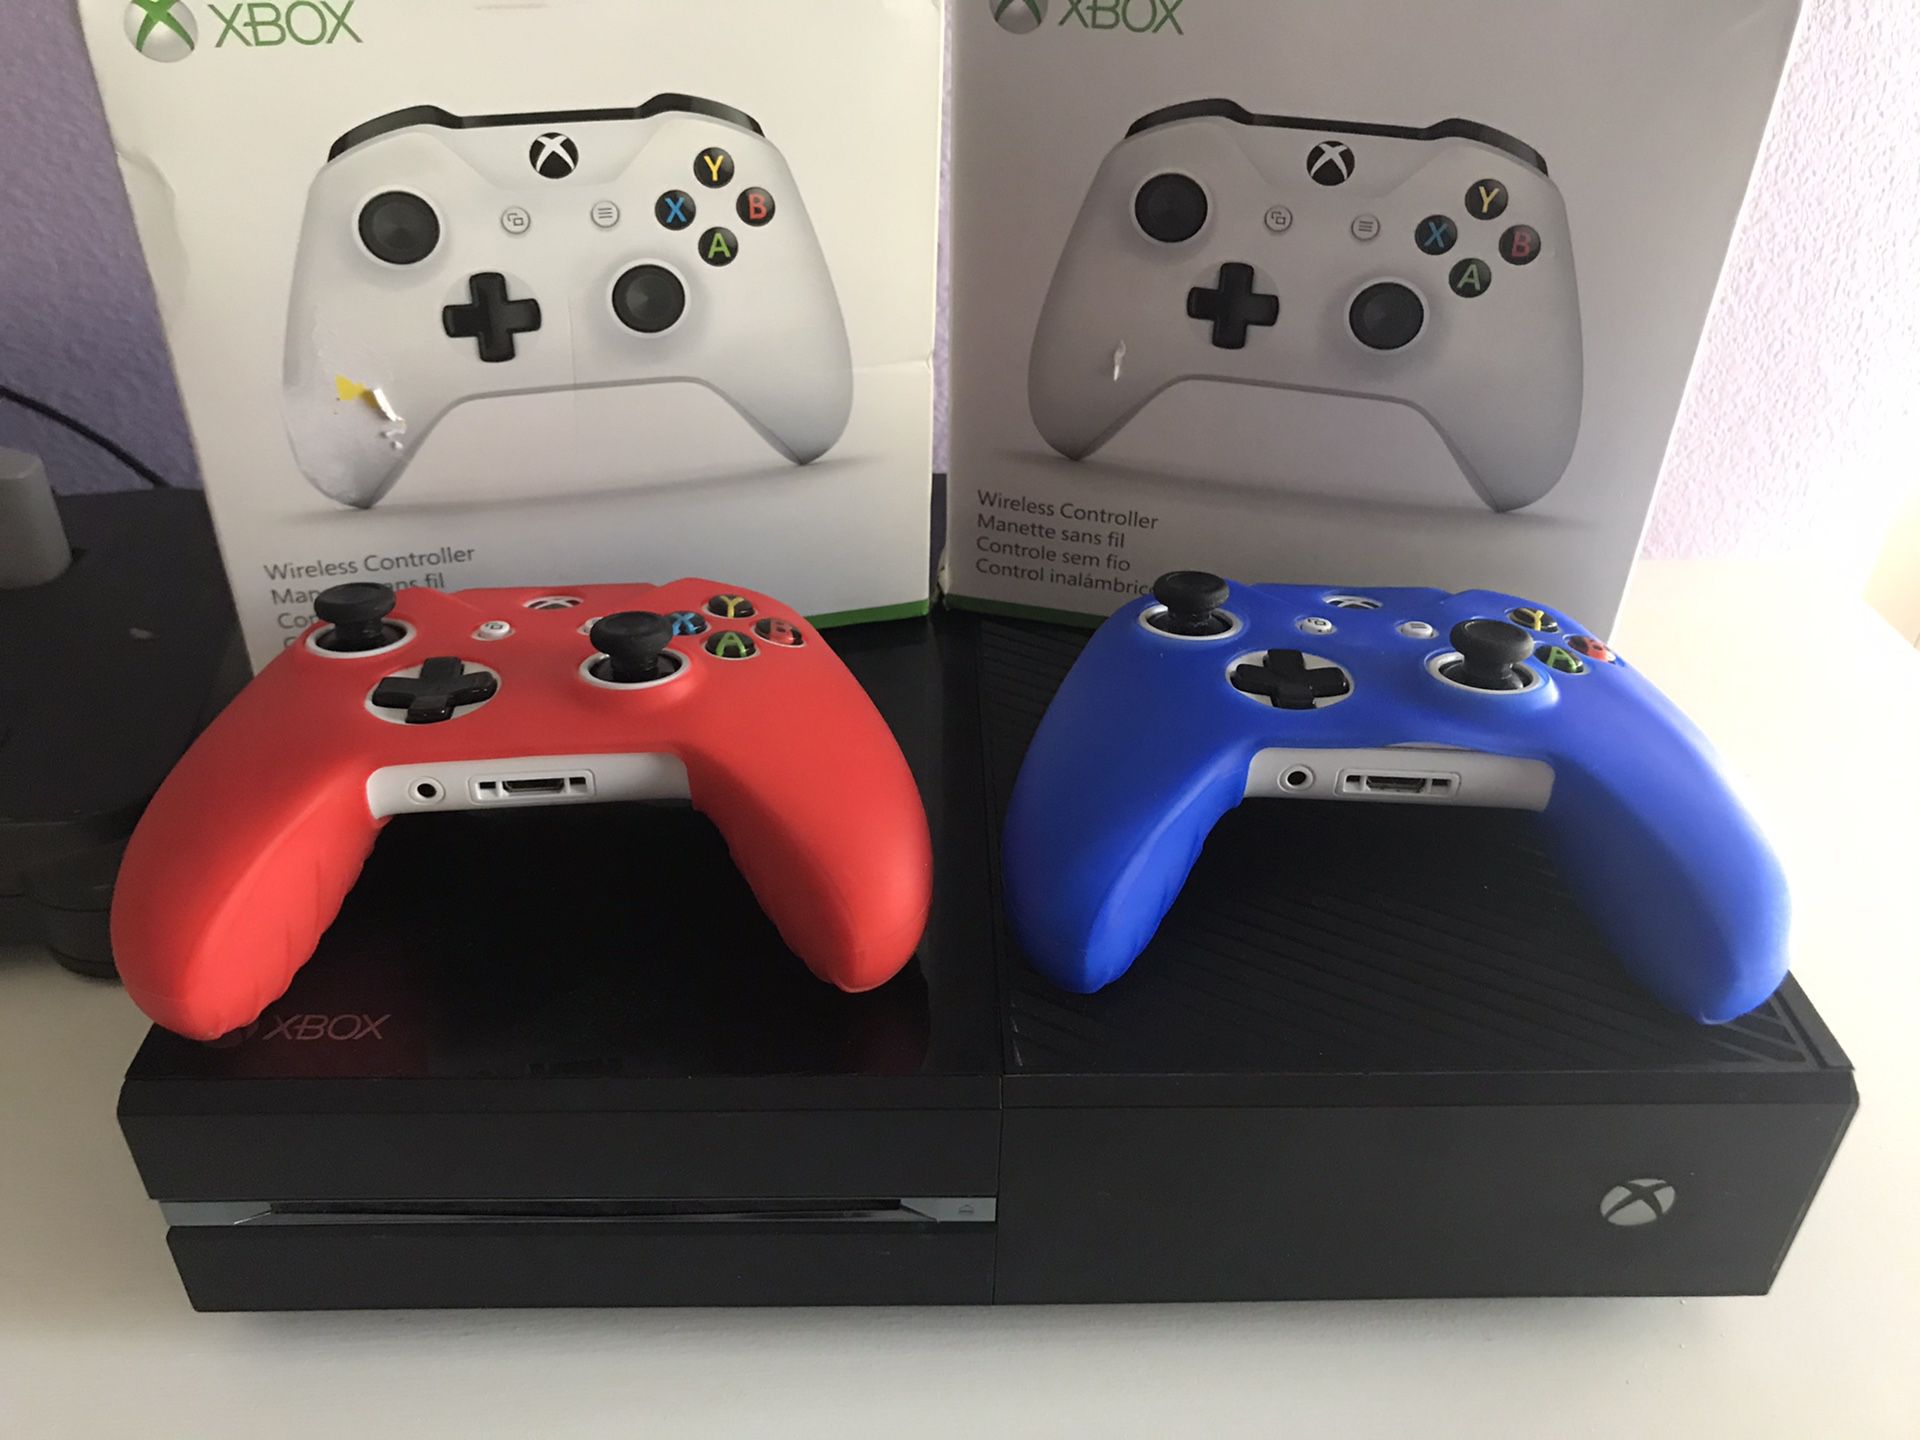 Xbox one with two controllers - works great